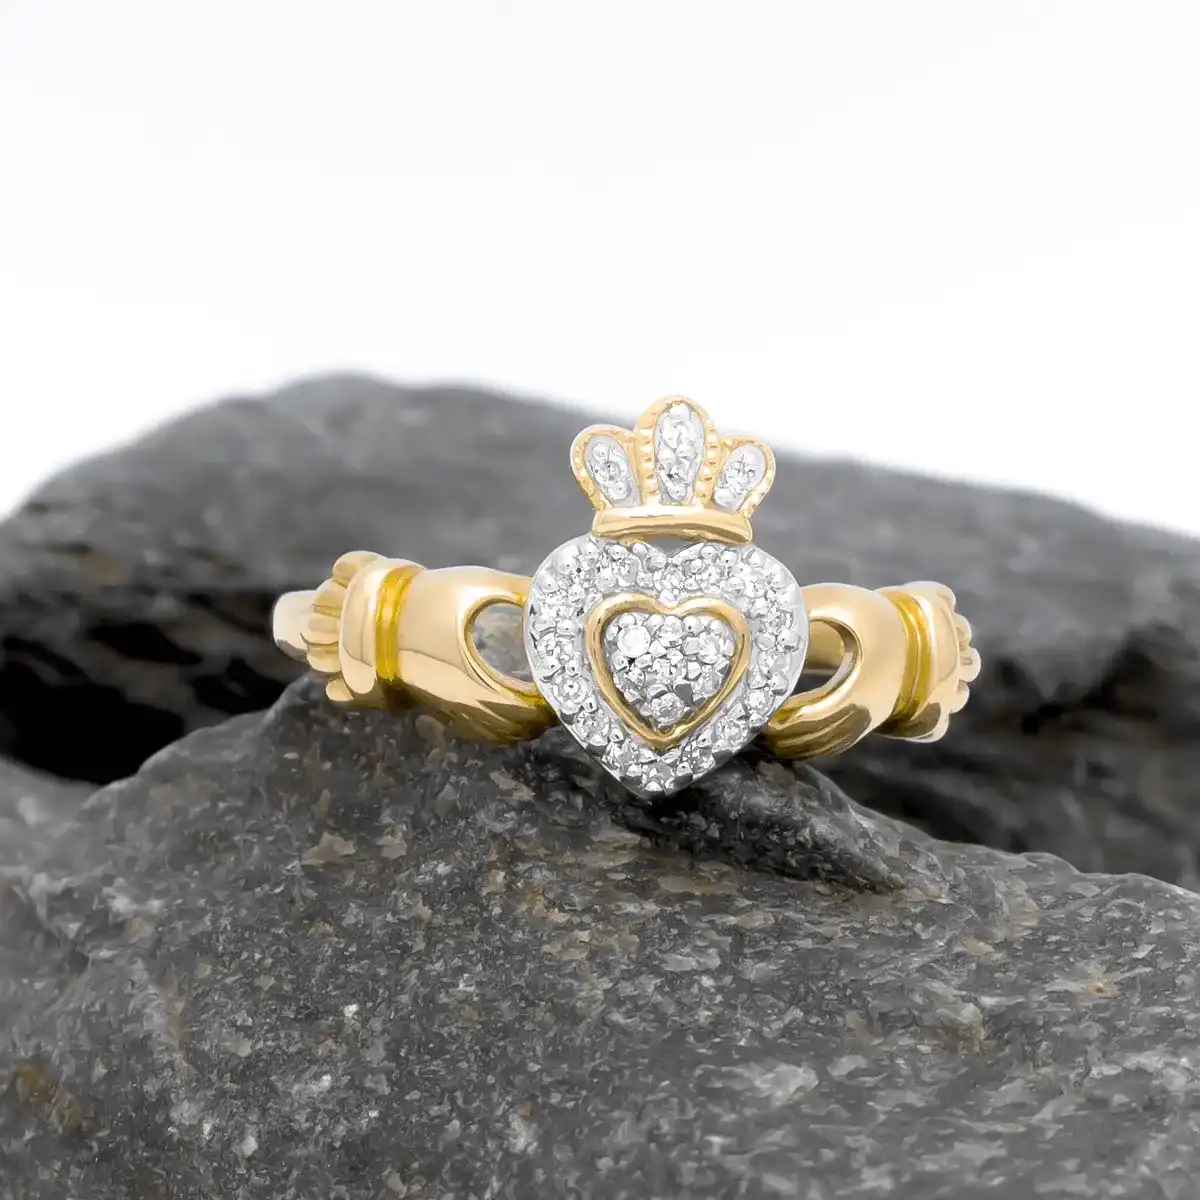 The significance and symbolism of the Claddagh ring | Scotland Kilt Co US